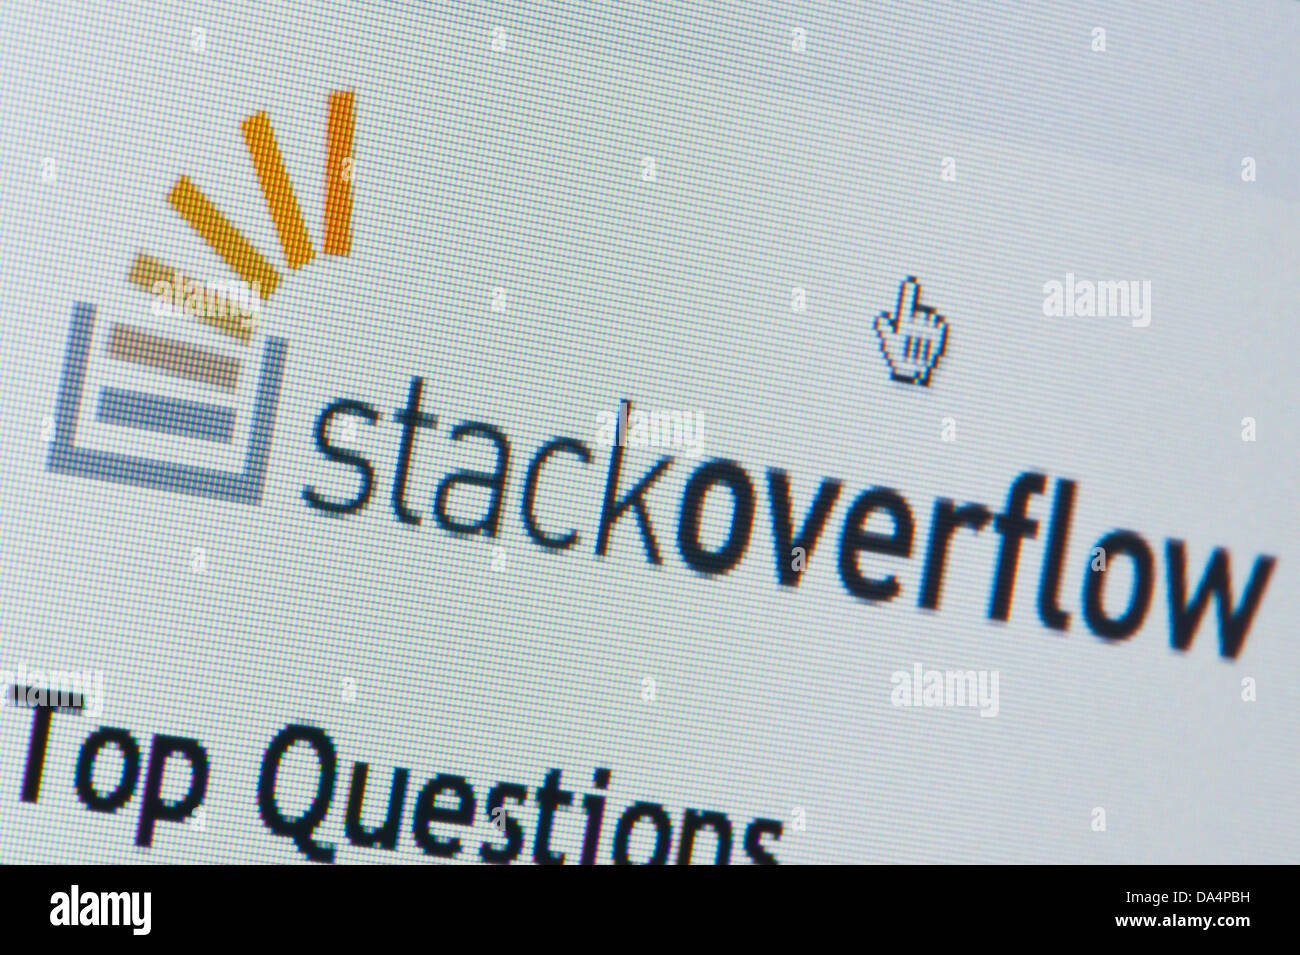 Close up of the Stack Overflow logo as seen on its website. (Editorial use only: print, TV, e-book and editorial website). Stock Photo